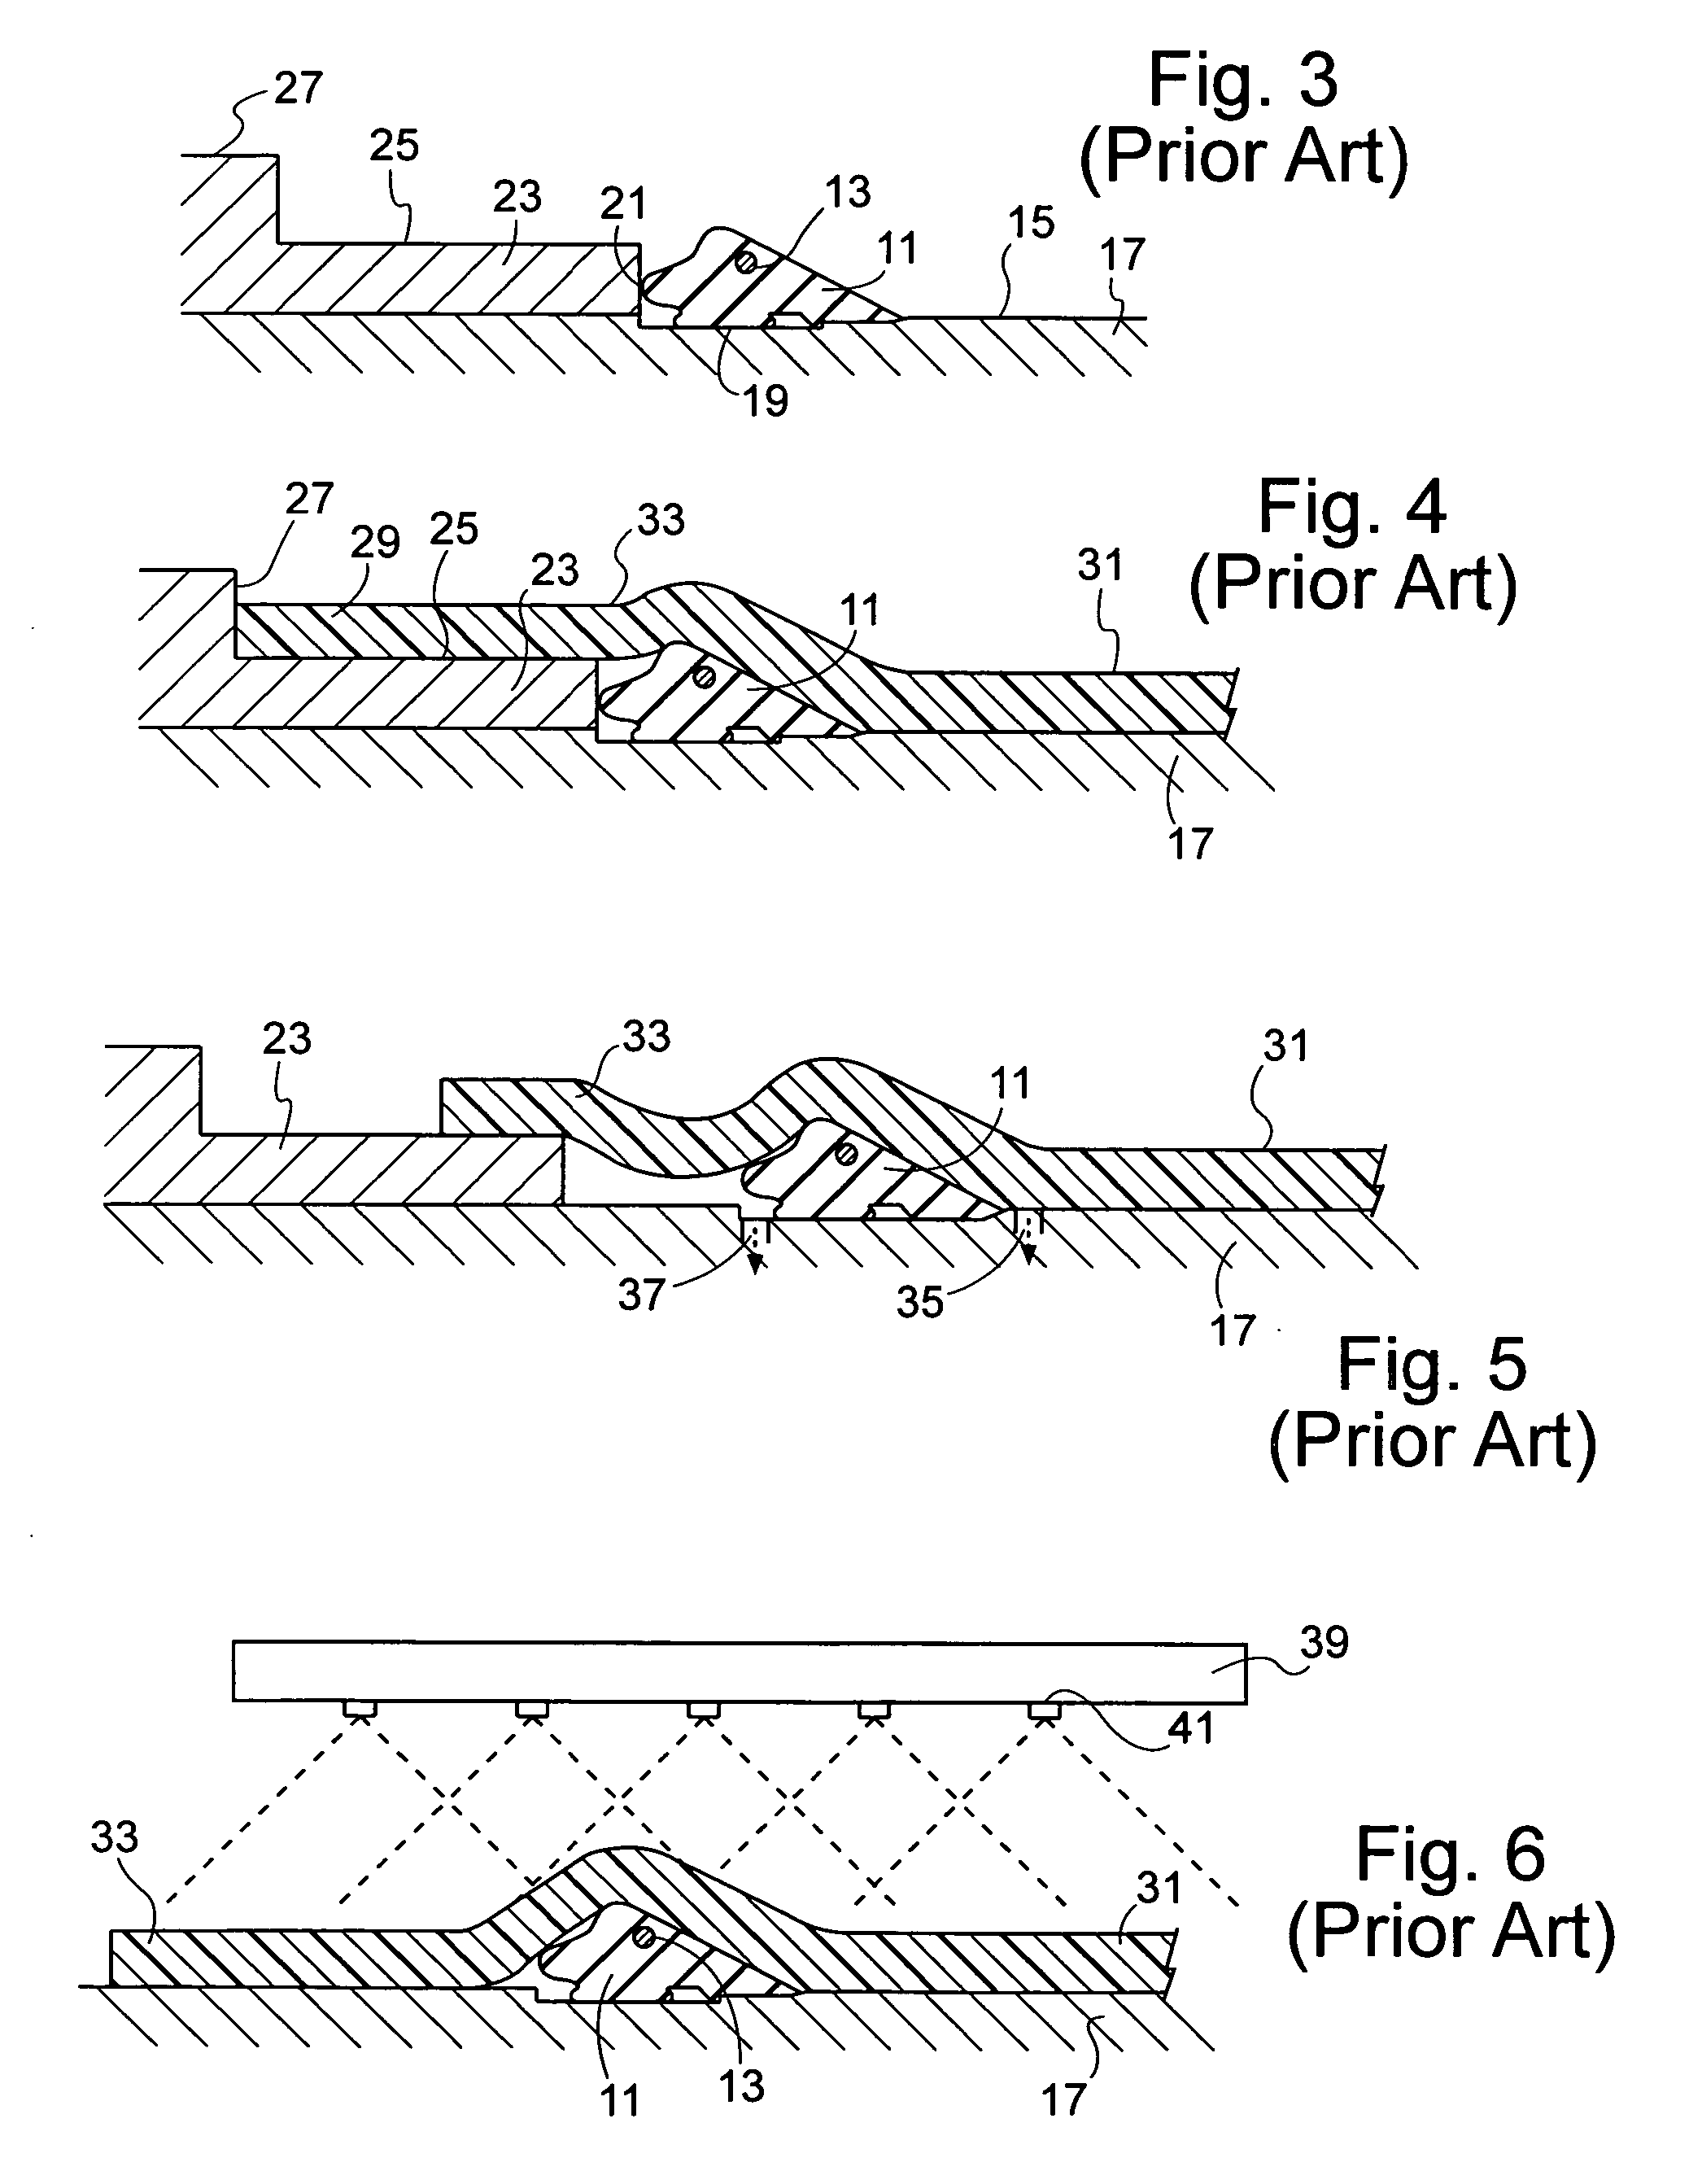 Integral restraint system and method of manufacture for plastic pipe